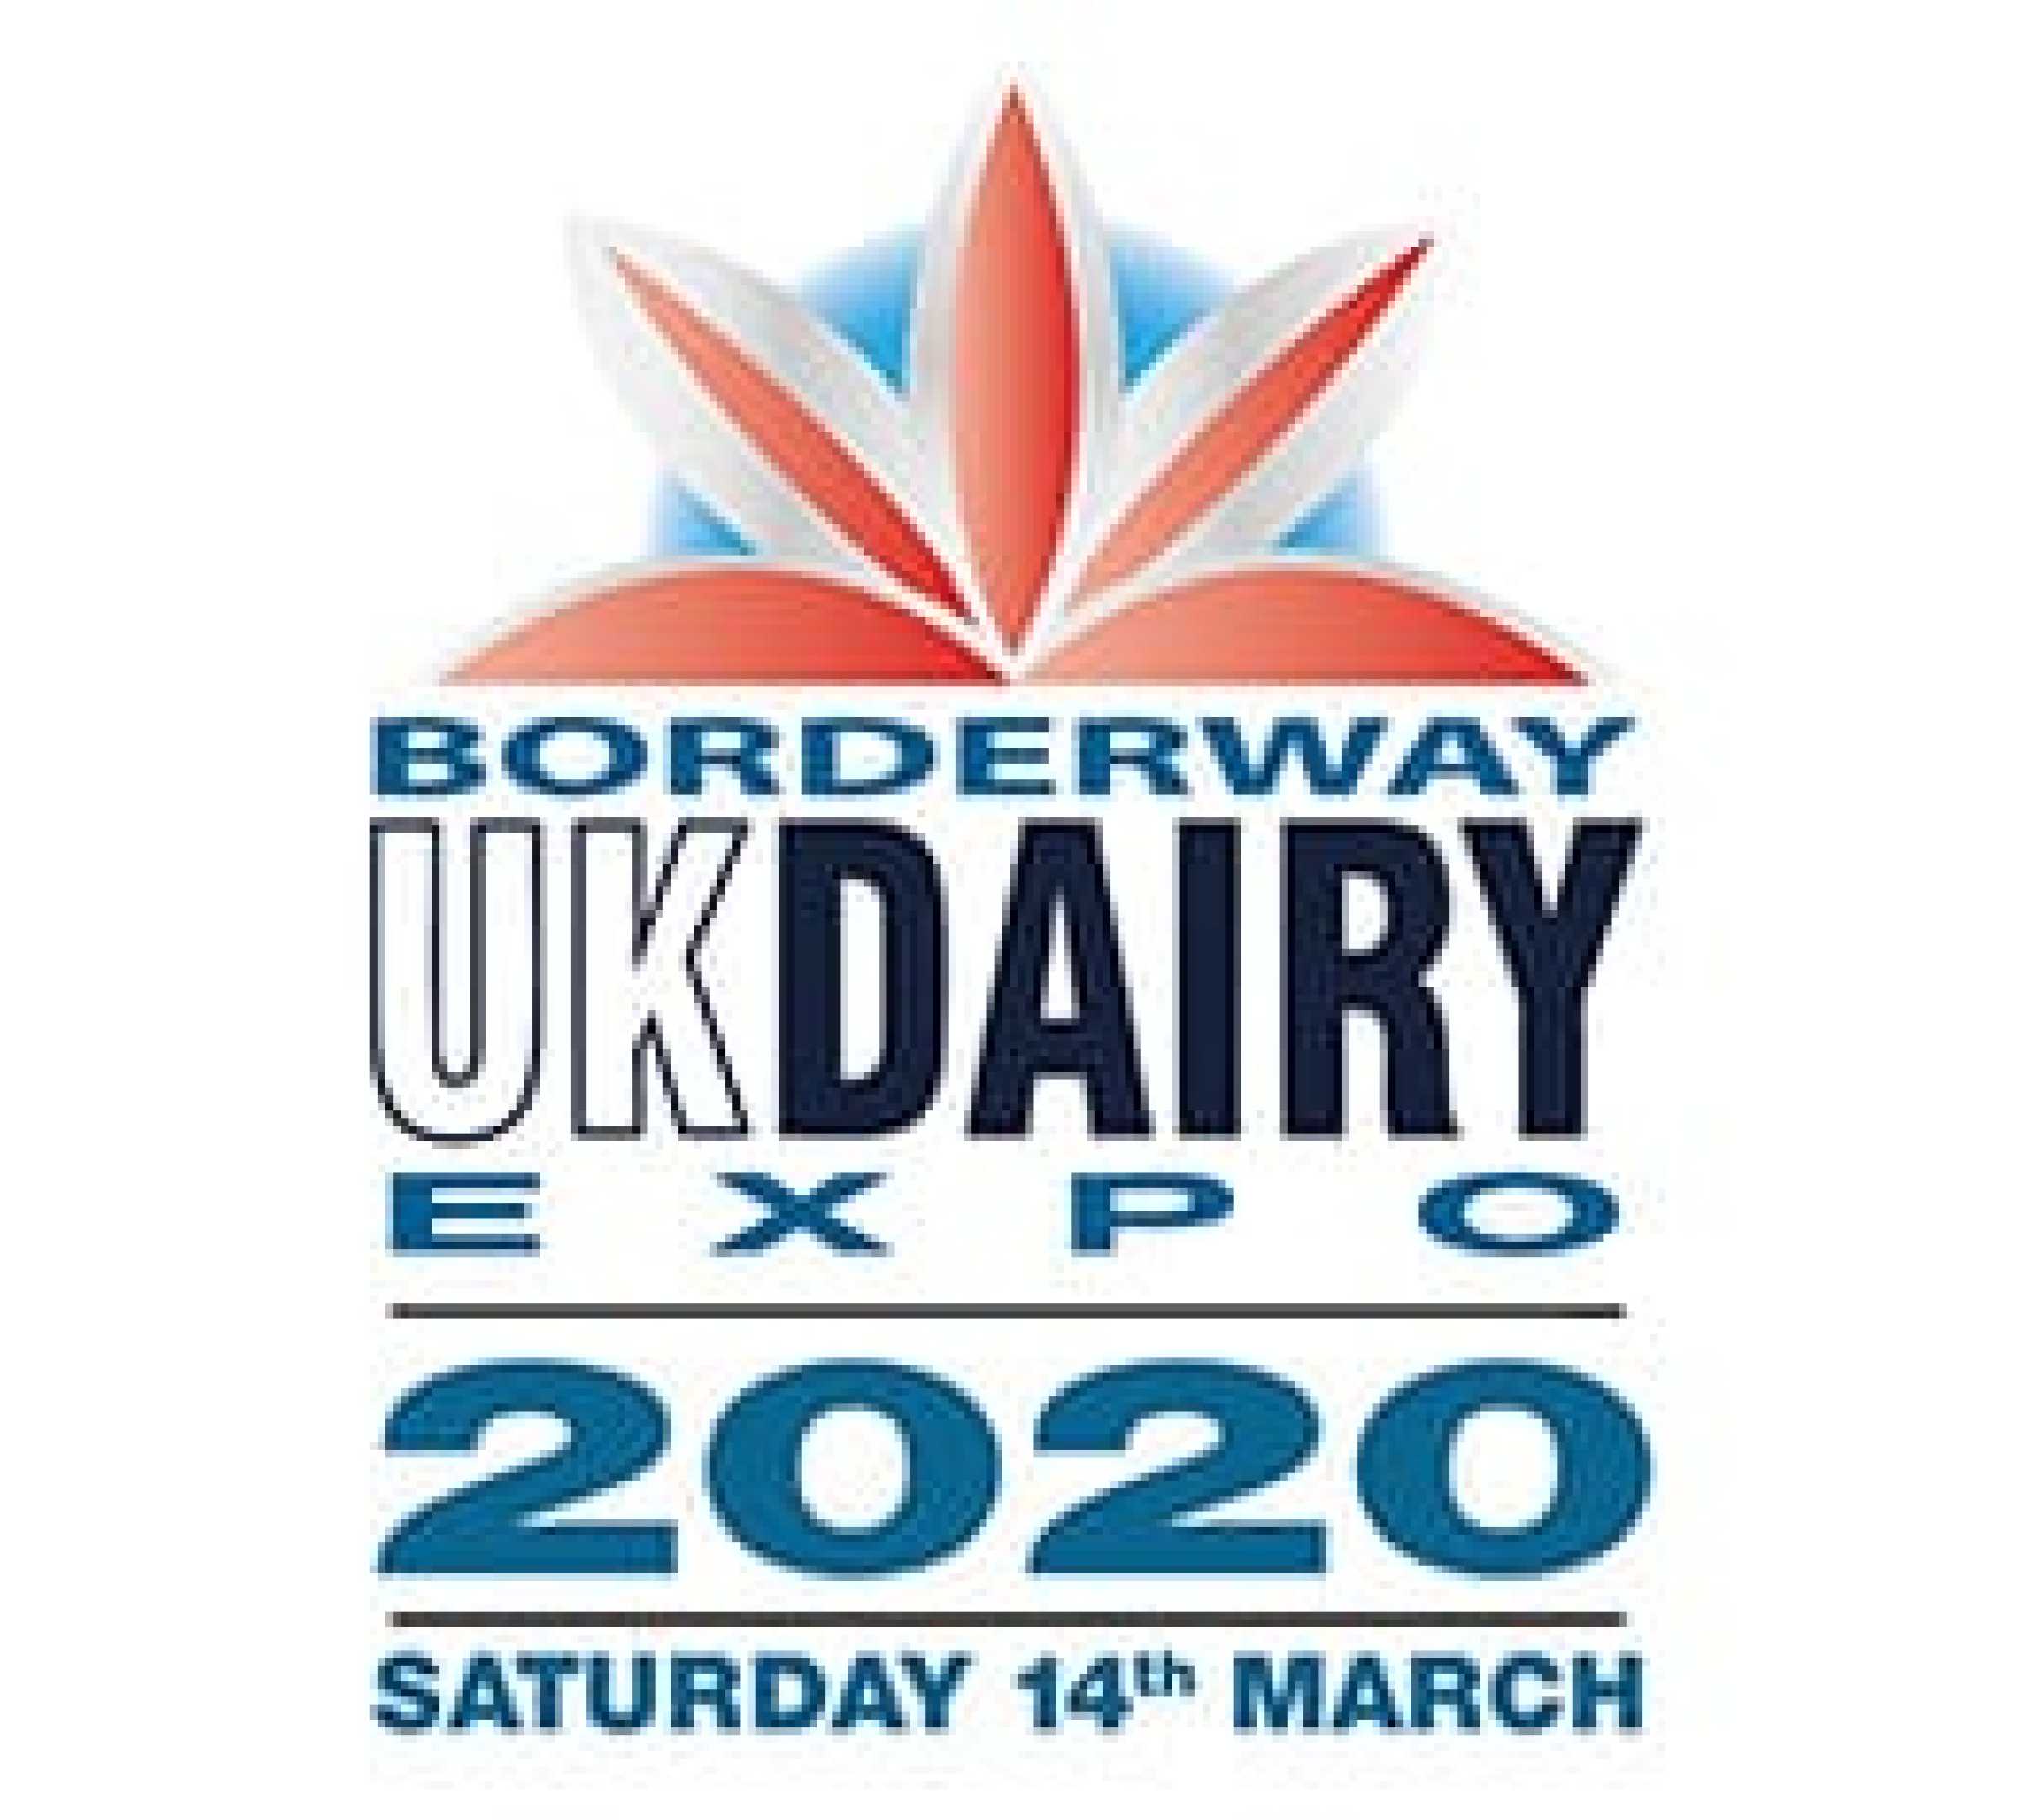 We’re supporting UK Dairy Expo again this year!